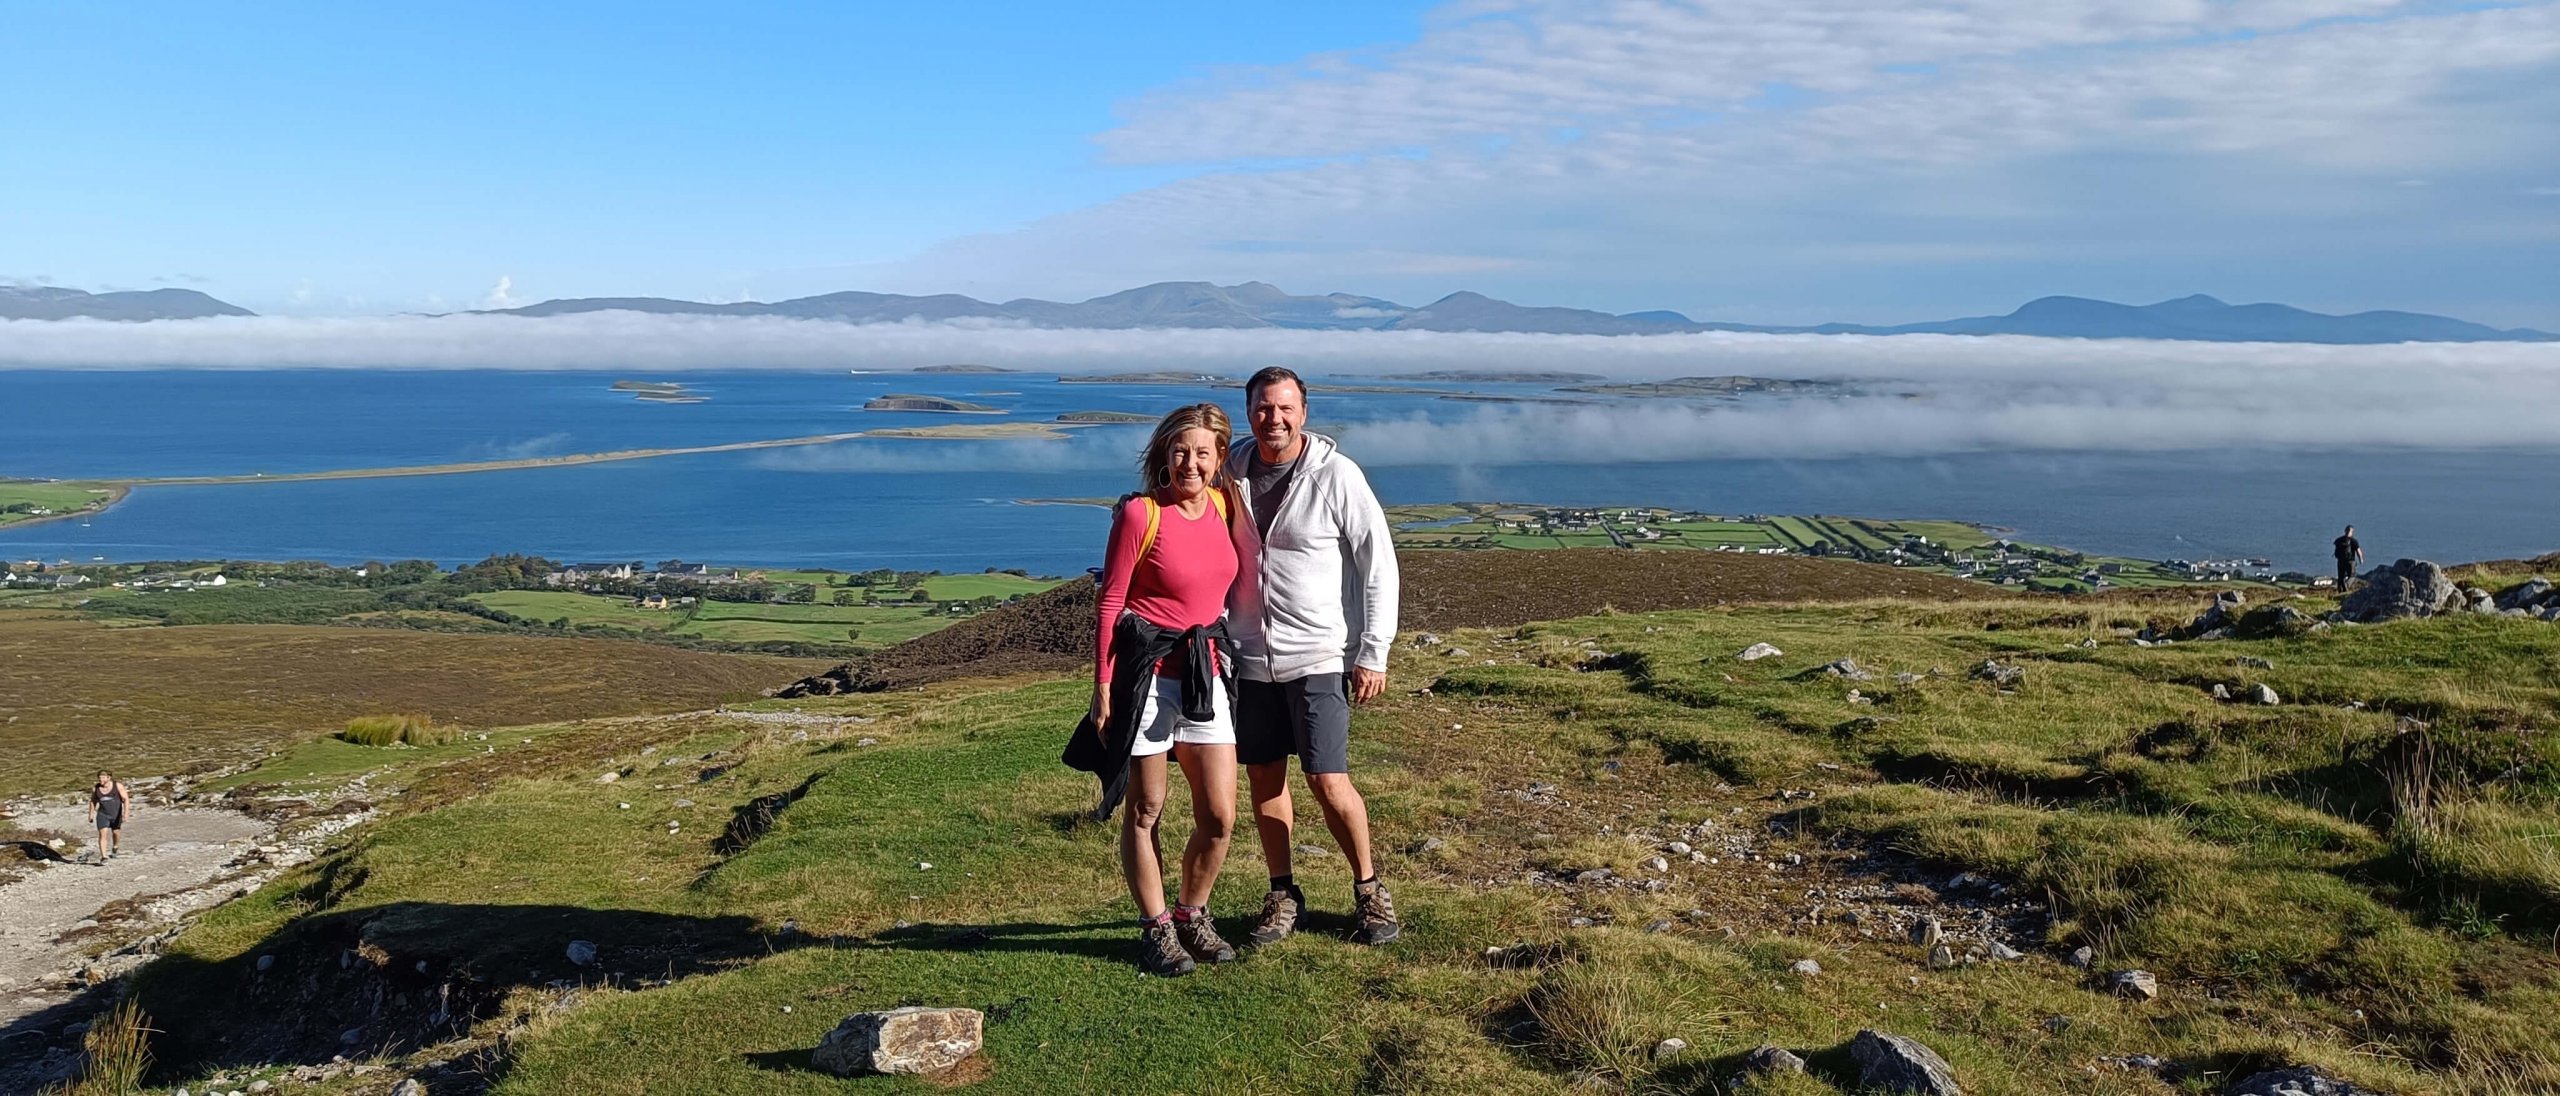 Two tour guests in scenic landscape in Ireland